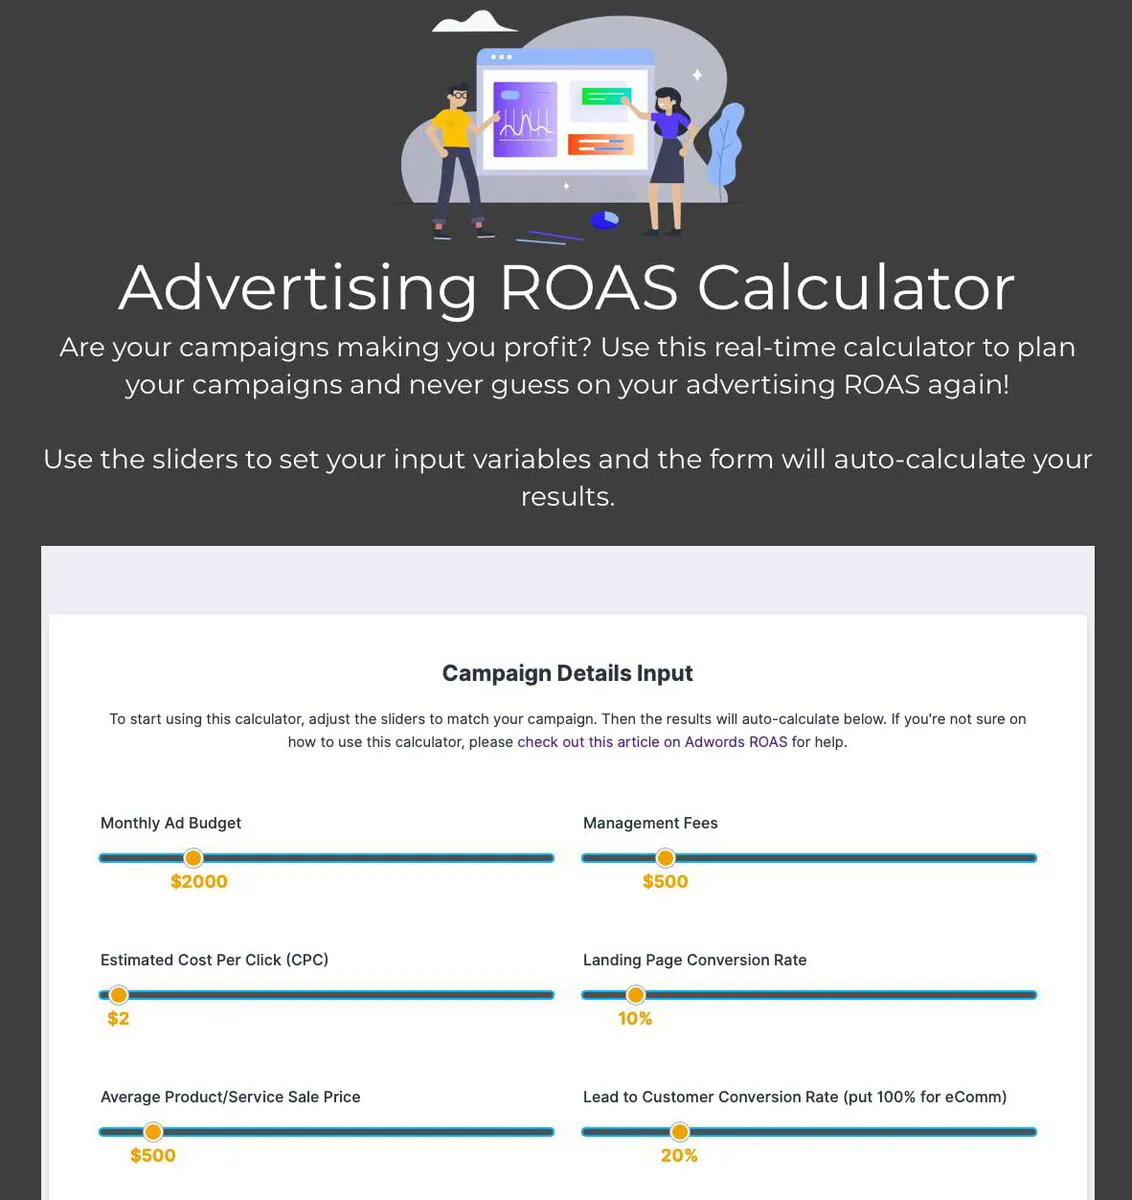 use the free advertising ROAS calculator to predict and plan your ad campaigns profitability!